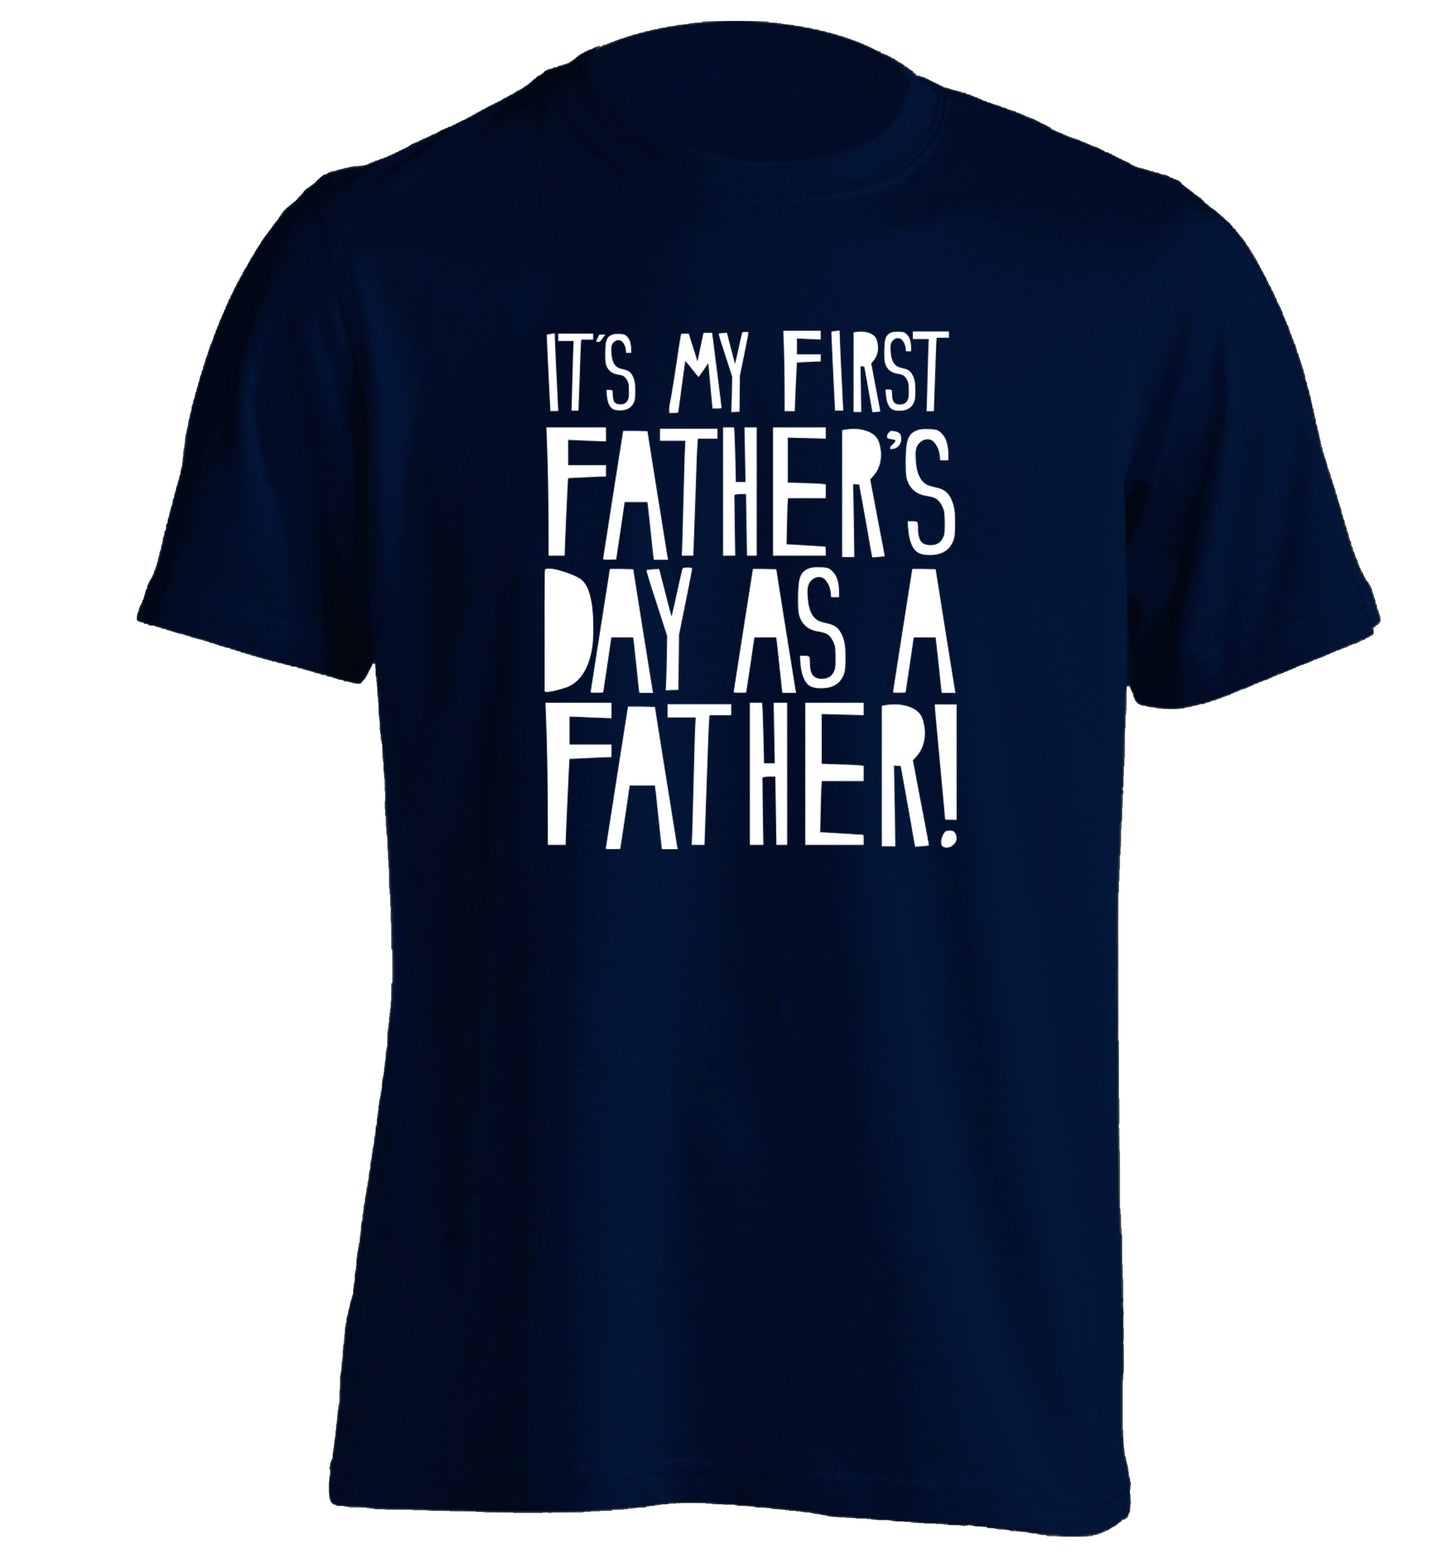 It's my first Father's Day as a father! adults unisex navy Tshirt 2XL